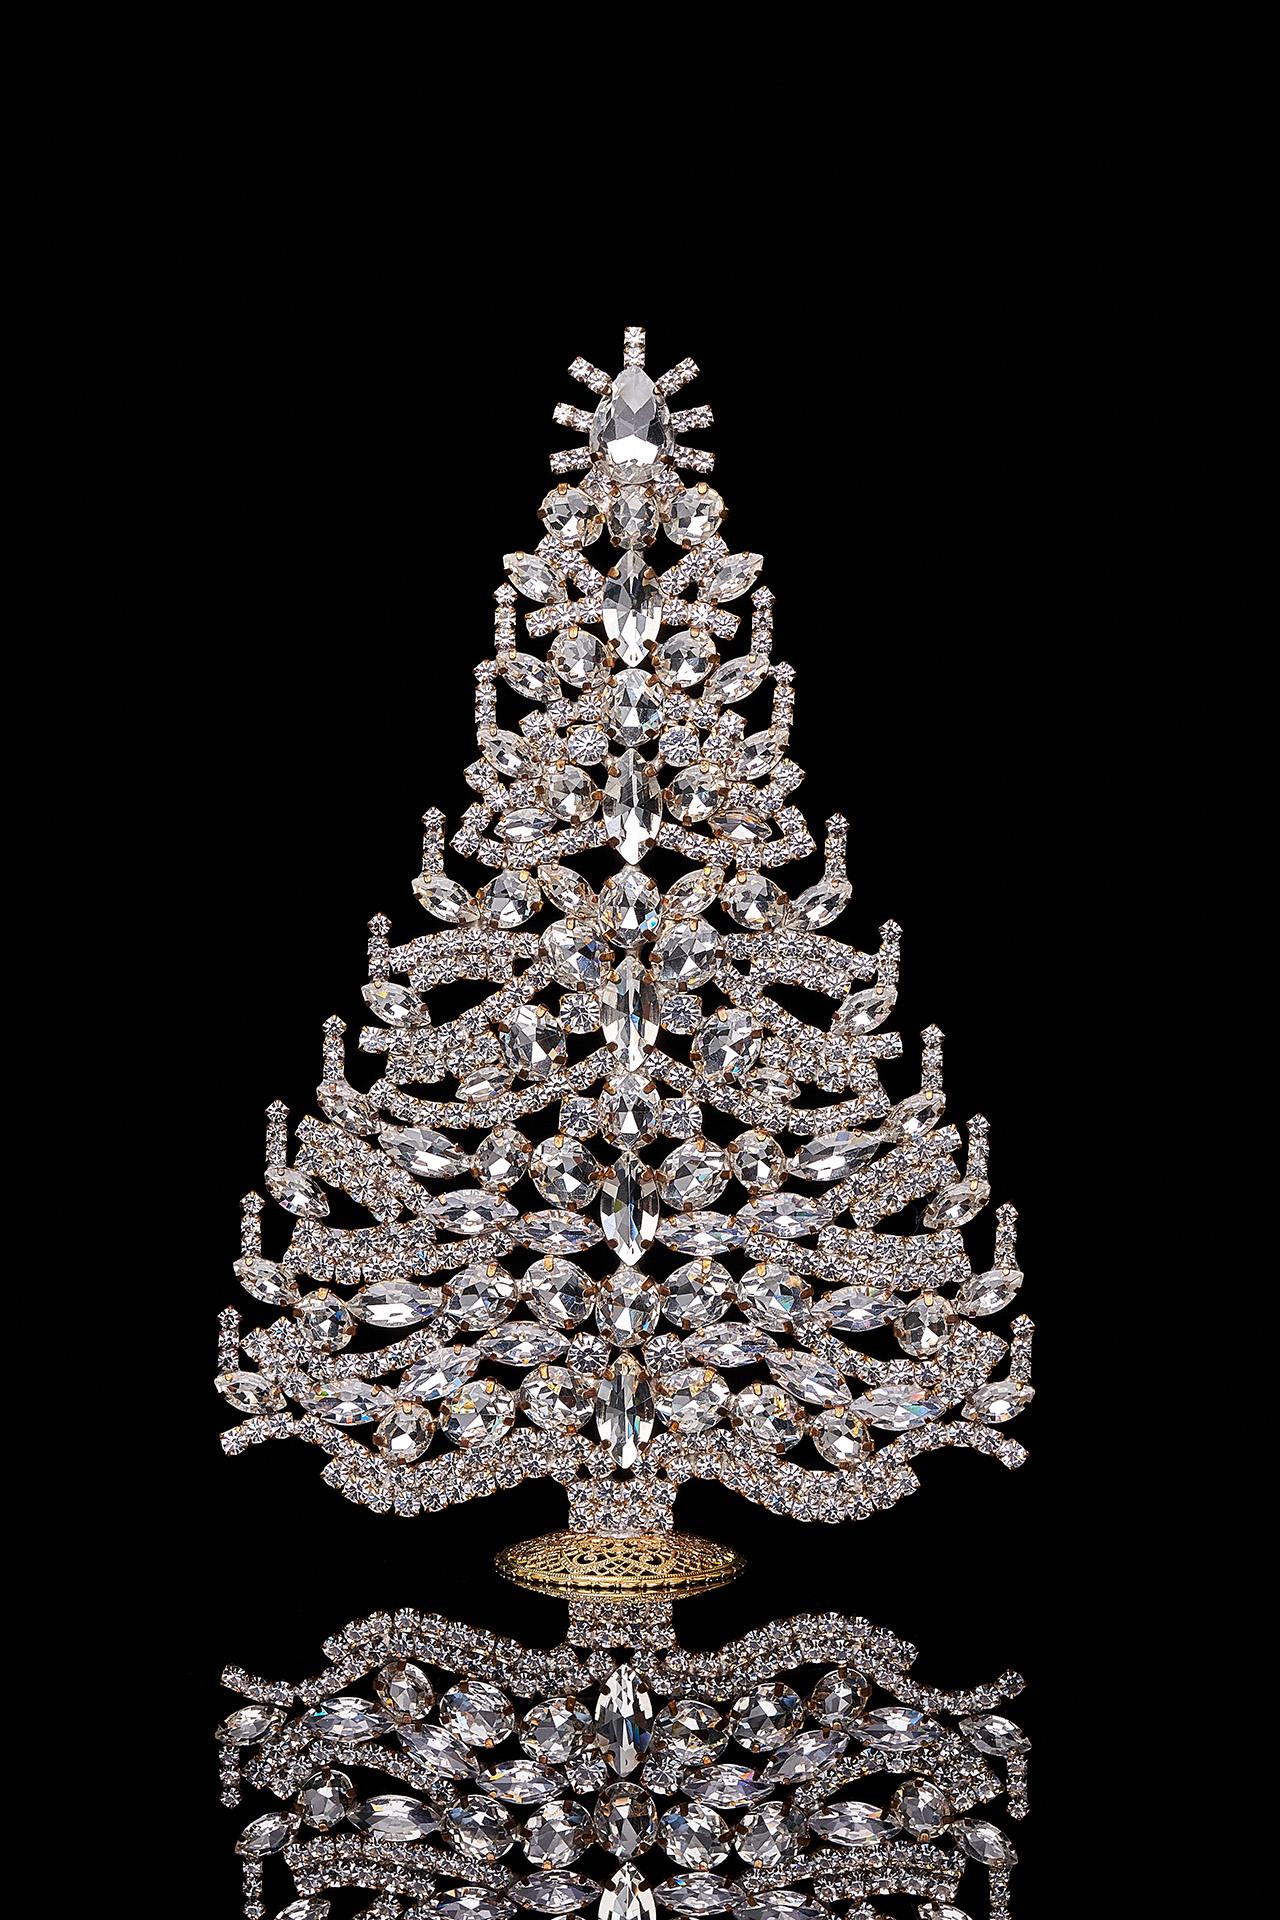 Handmade tabletop Christmas tree with clear crystals